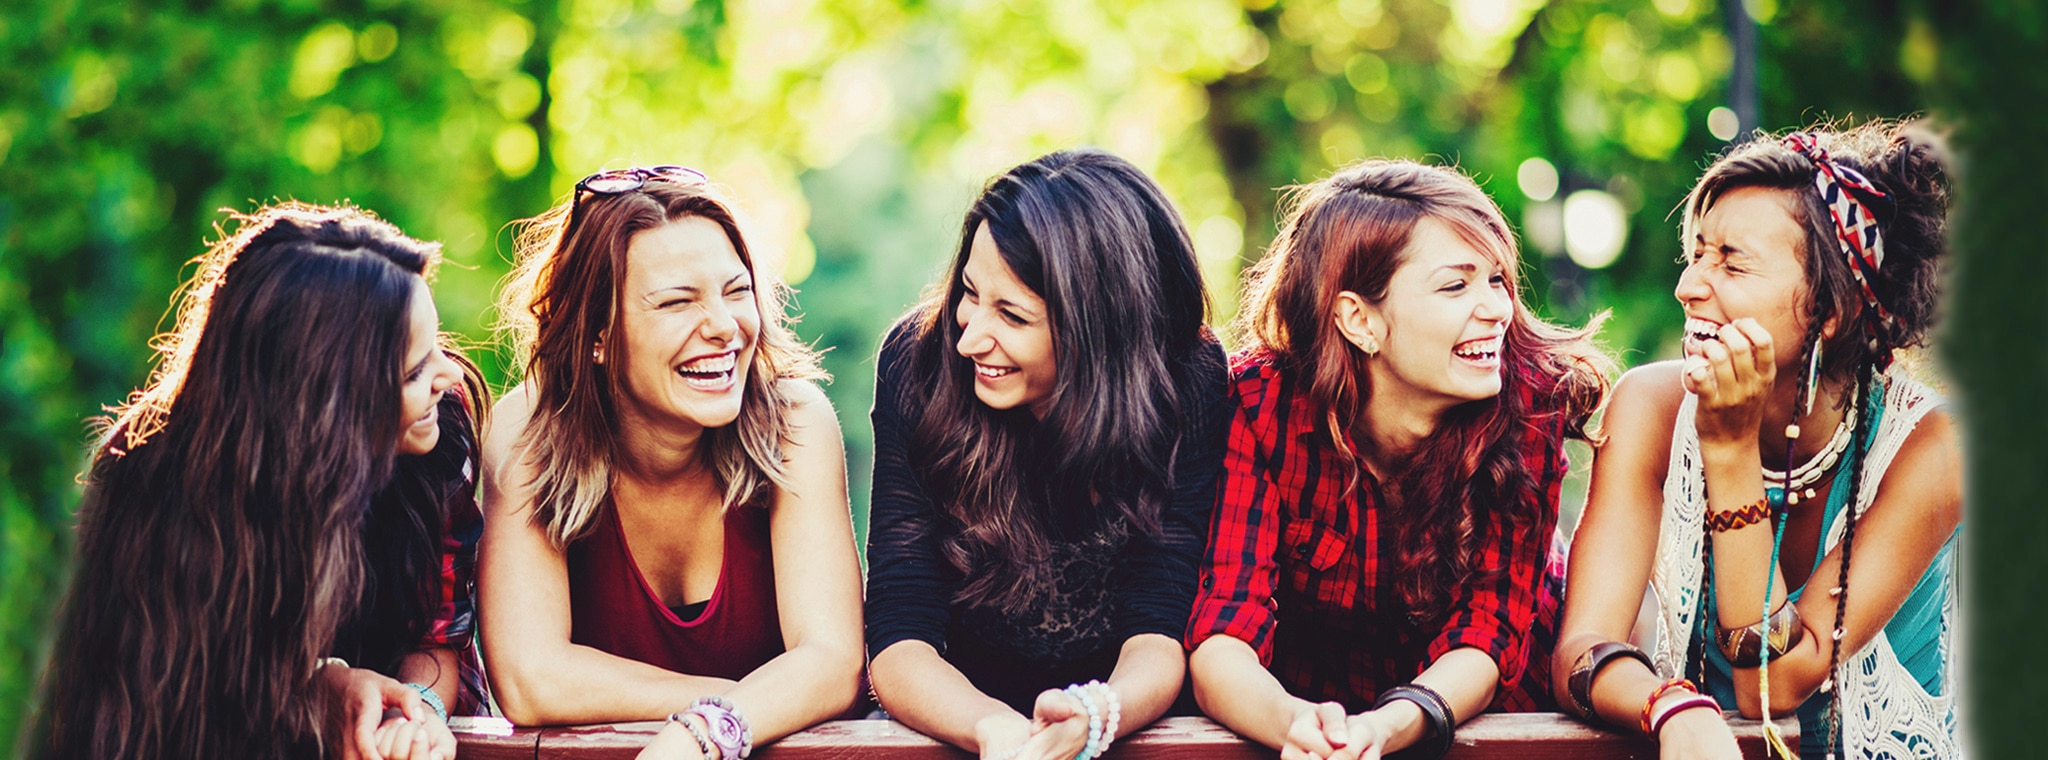 A group of girlfriends with straight and curly hair laughing together on a bridge by a lake.